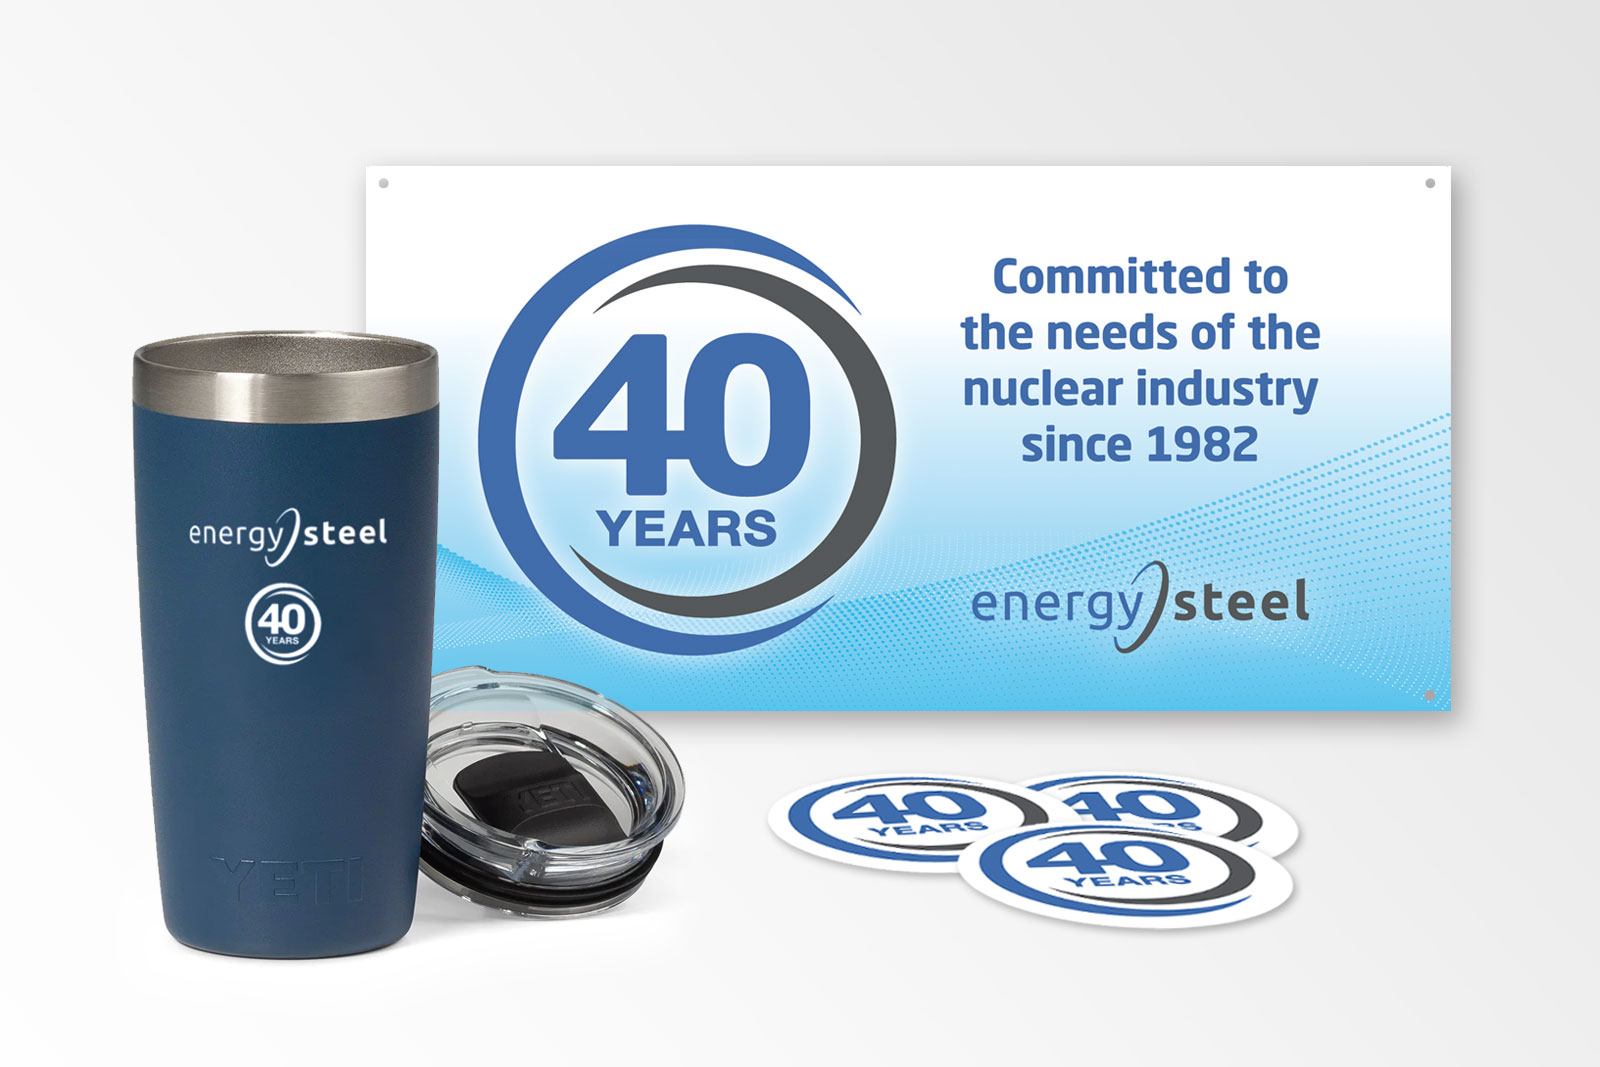 a coffee mug, stickers, and a logo for energy steel's anniversary campaign